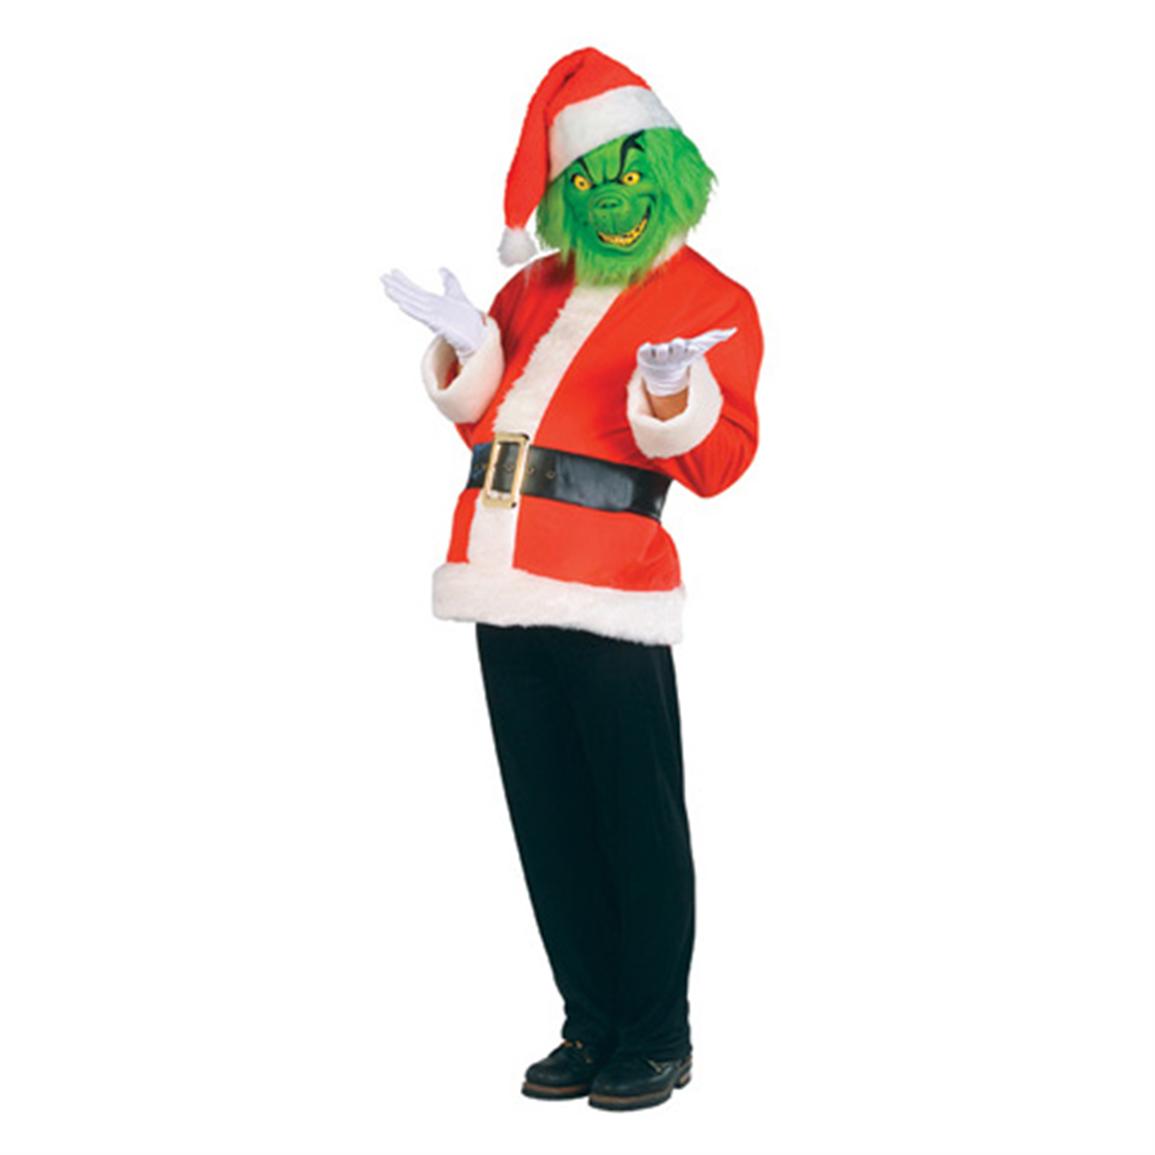 Morris Costumes Deluxe Grinch Costume - 193651, Costumes at Sportsman's ...